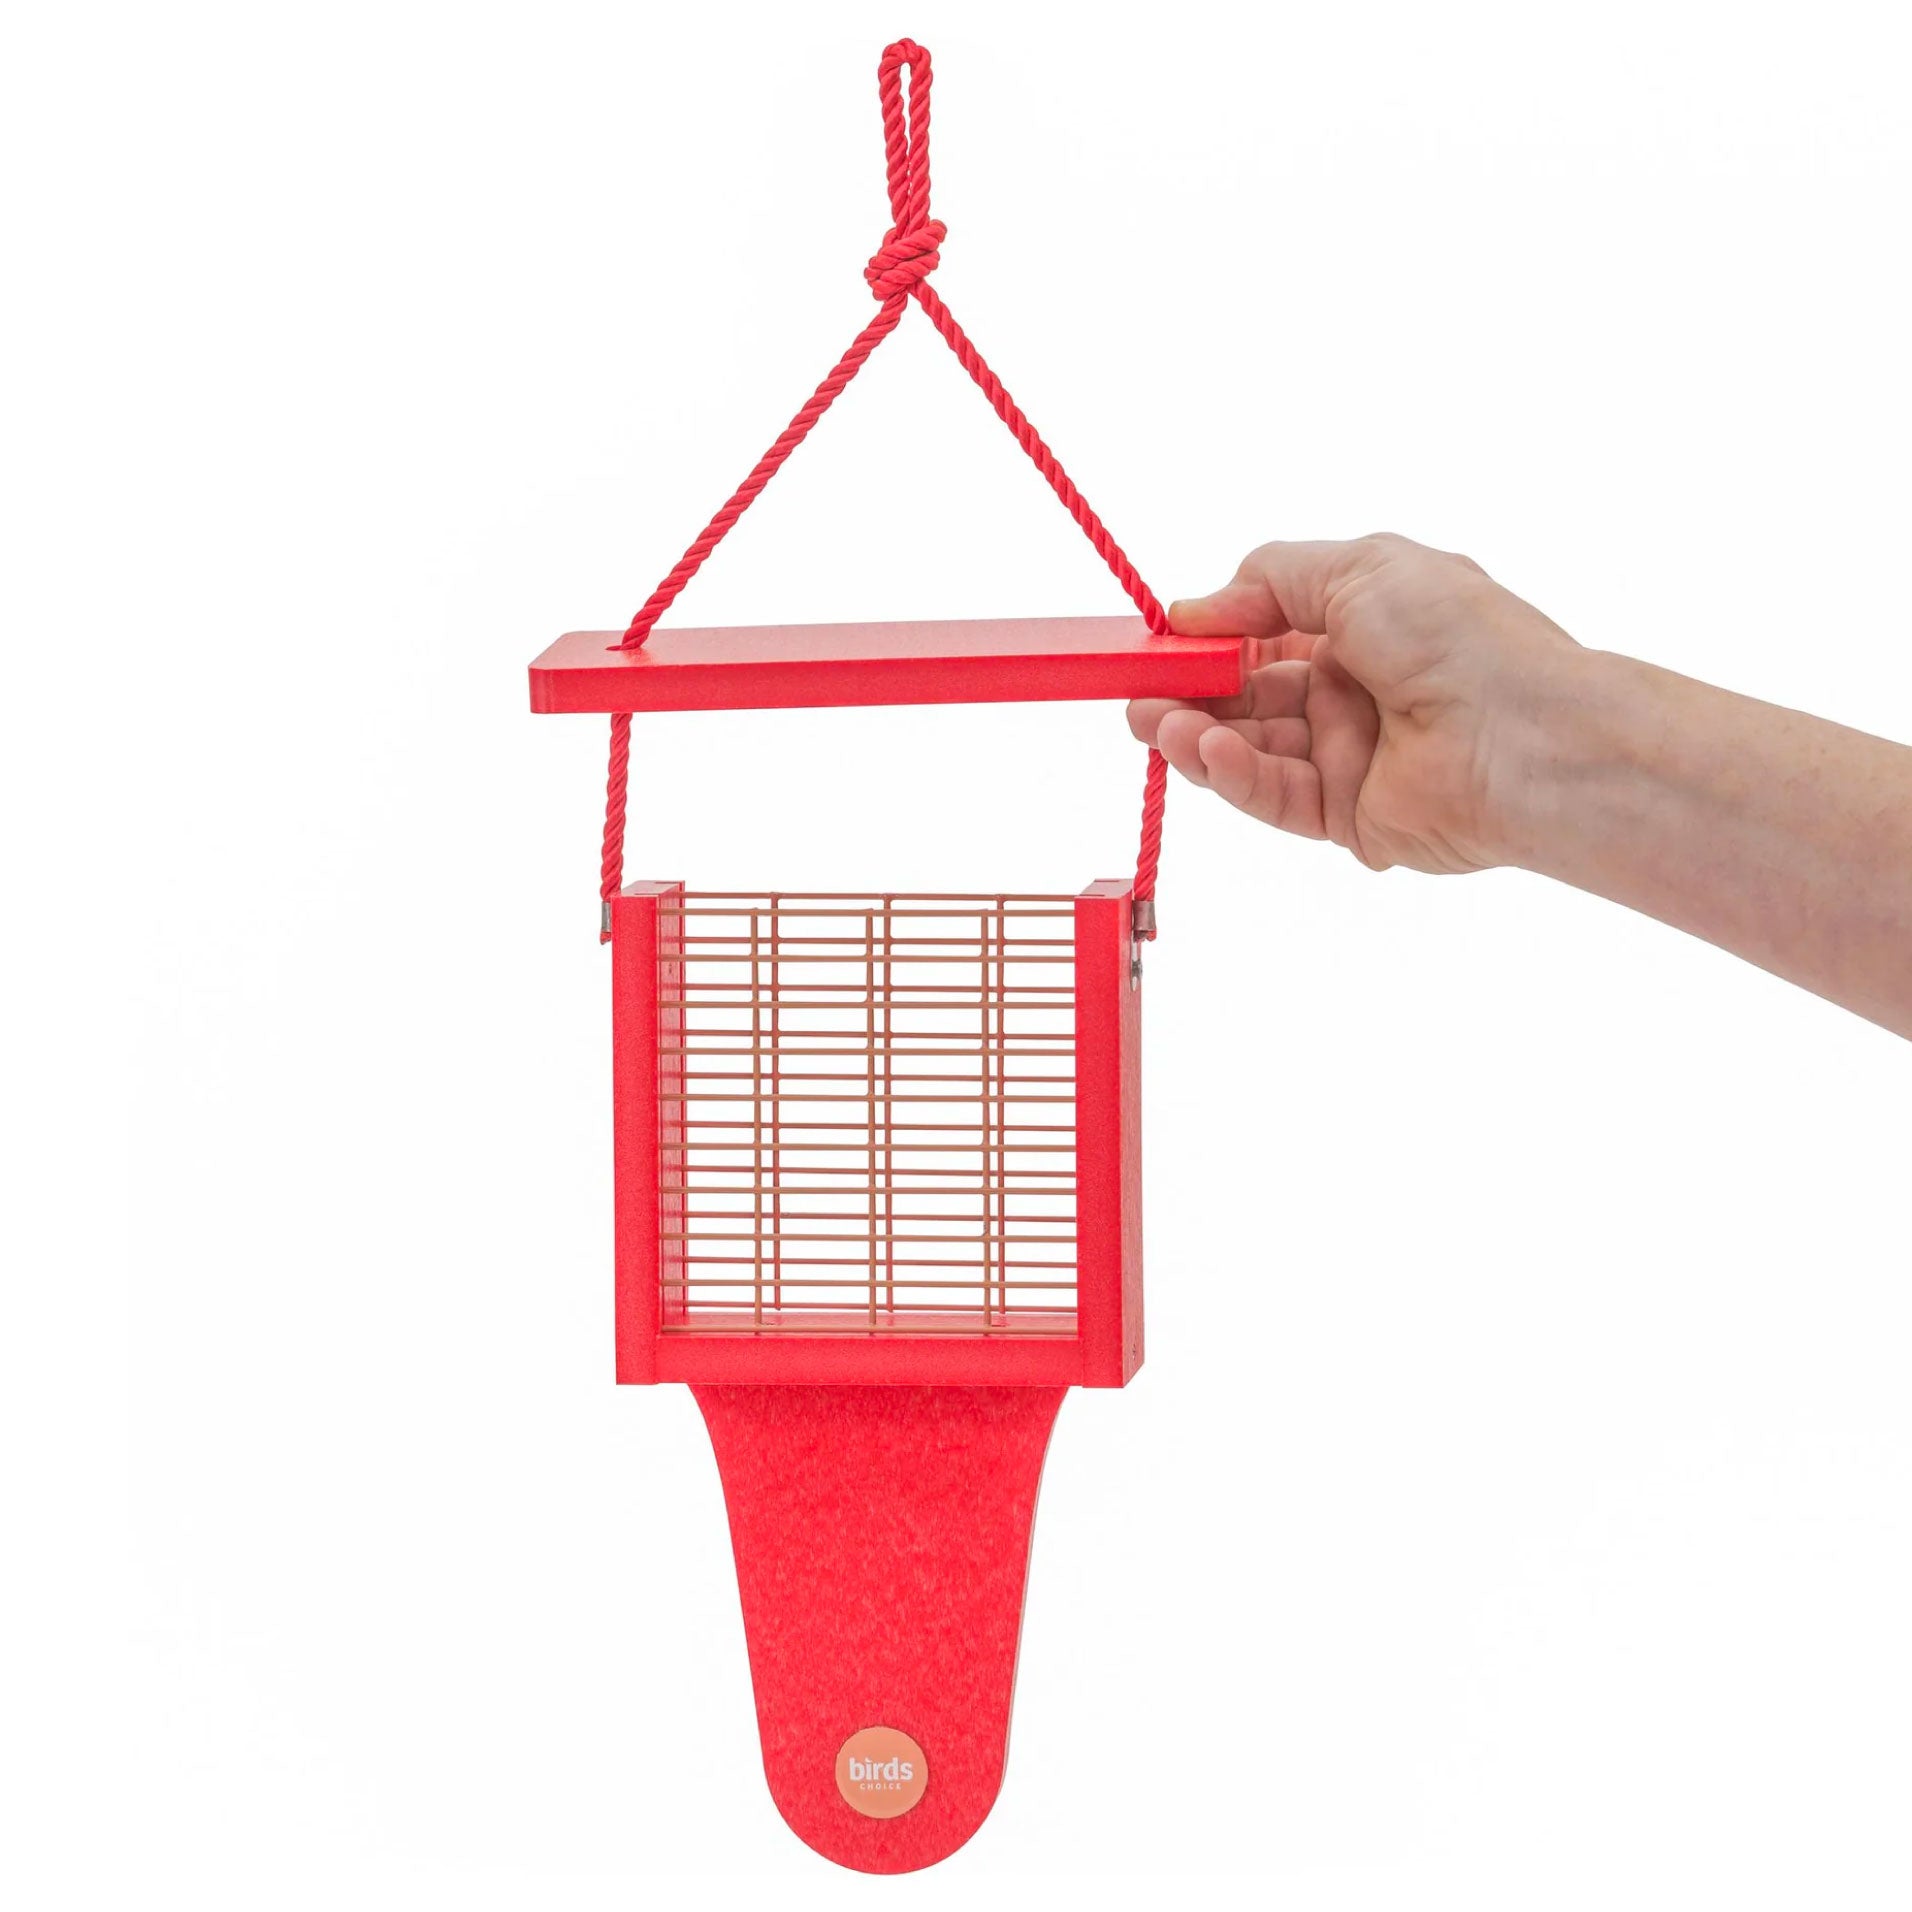 Suet Feeder with Tail Prop - Red